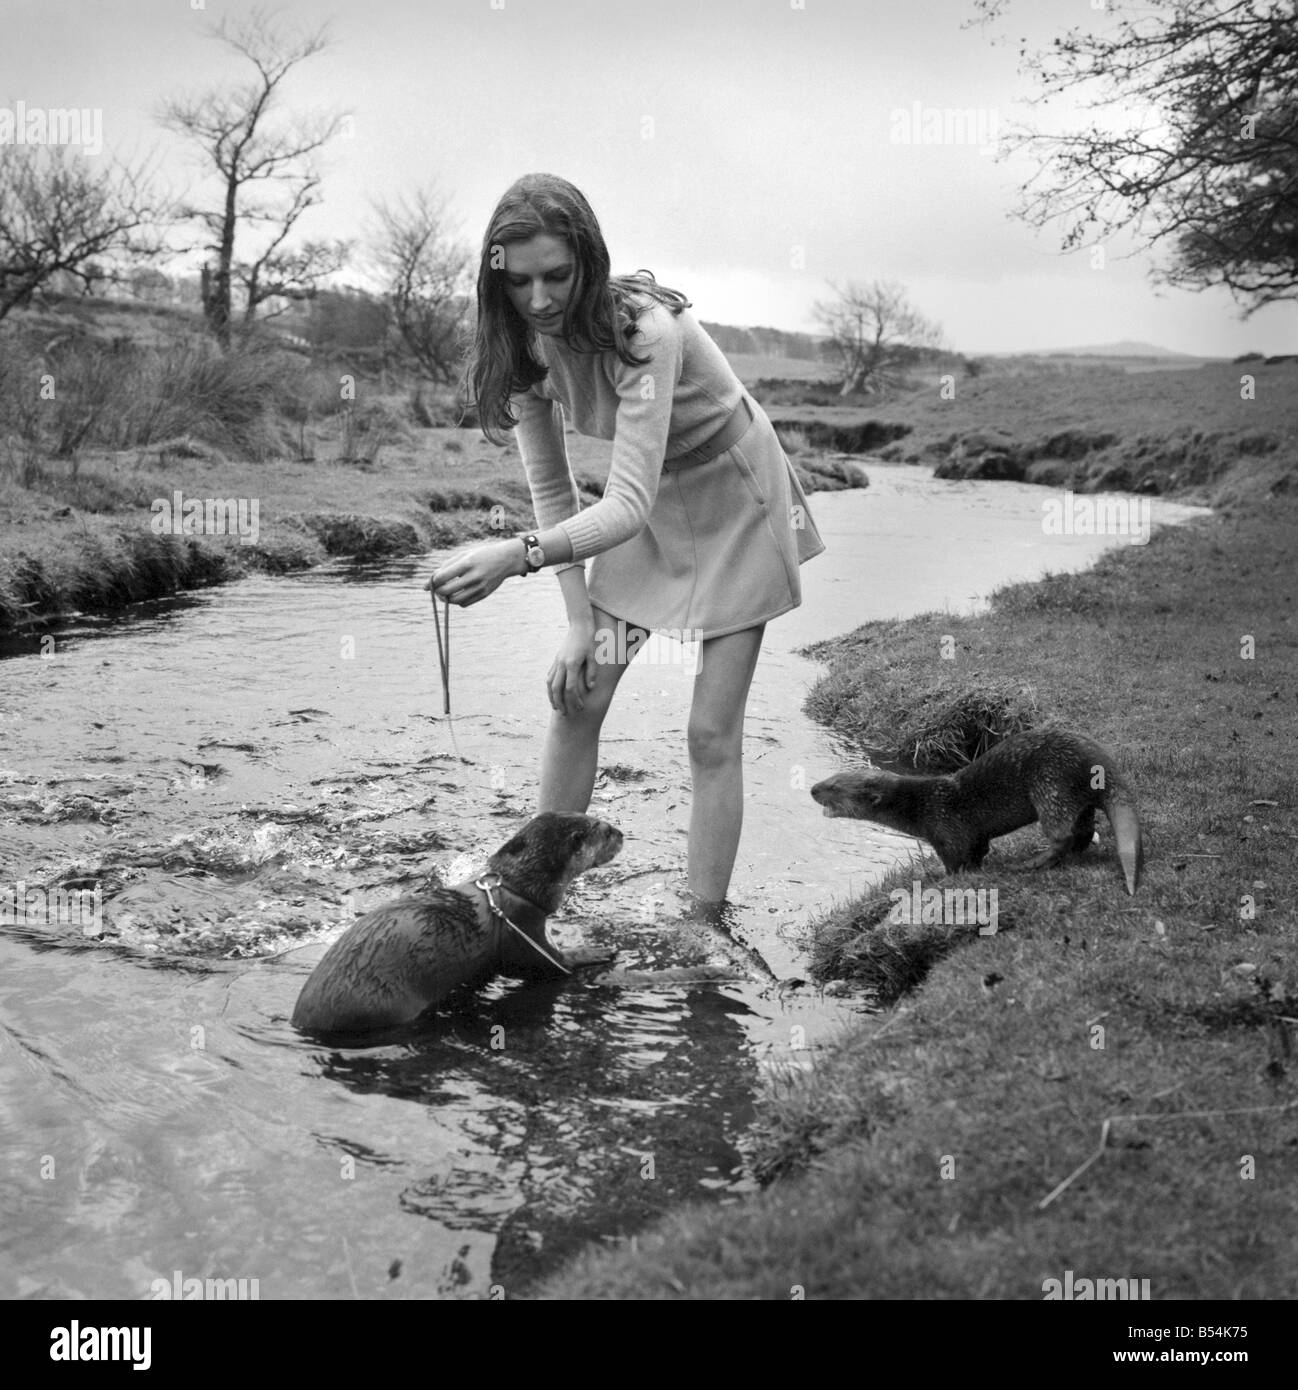 ix Malayan otters are the pets of Vivien Taylor (23) of Bury, Lancs, at her isolated cottage in a lonely part of Dartmoor near Postbridge. She is training the otters for filming next Spring, when the 'star' otter 'Feets' will share the leading role with boy star Mark Lester in a film called 'Loki' about the boy and his strange pet, to be made in Canada. On the bank of the stream near her cottage, Vivien exercises the otters. The 'star' Feets is the otter on a harness and lead. November 1969 Z10877-002 Stock Photo